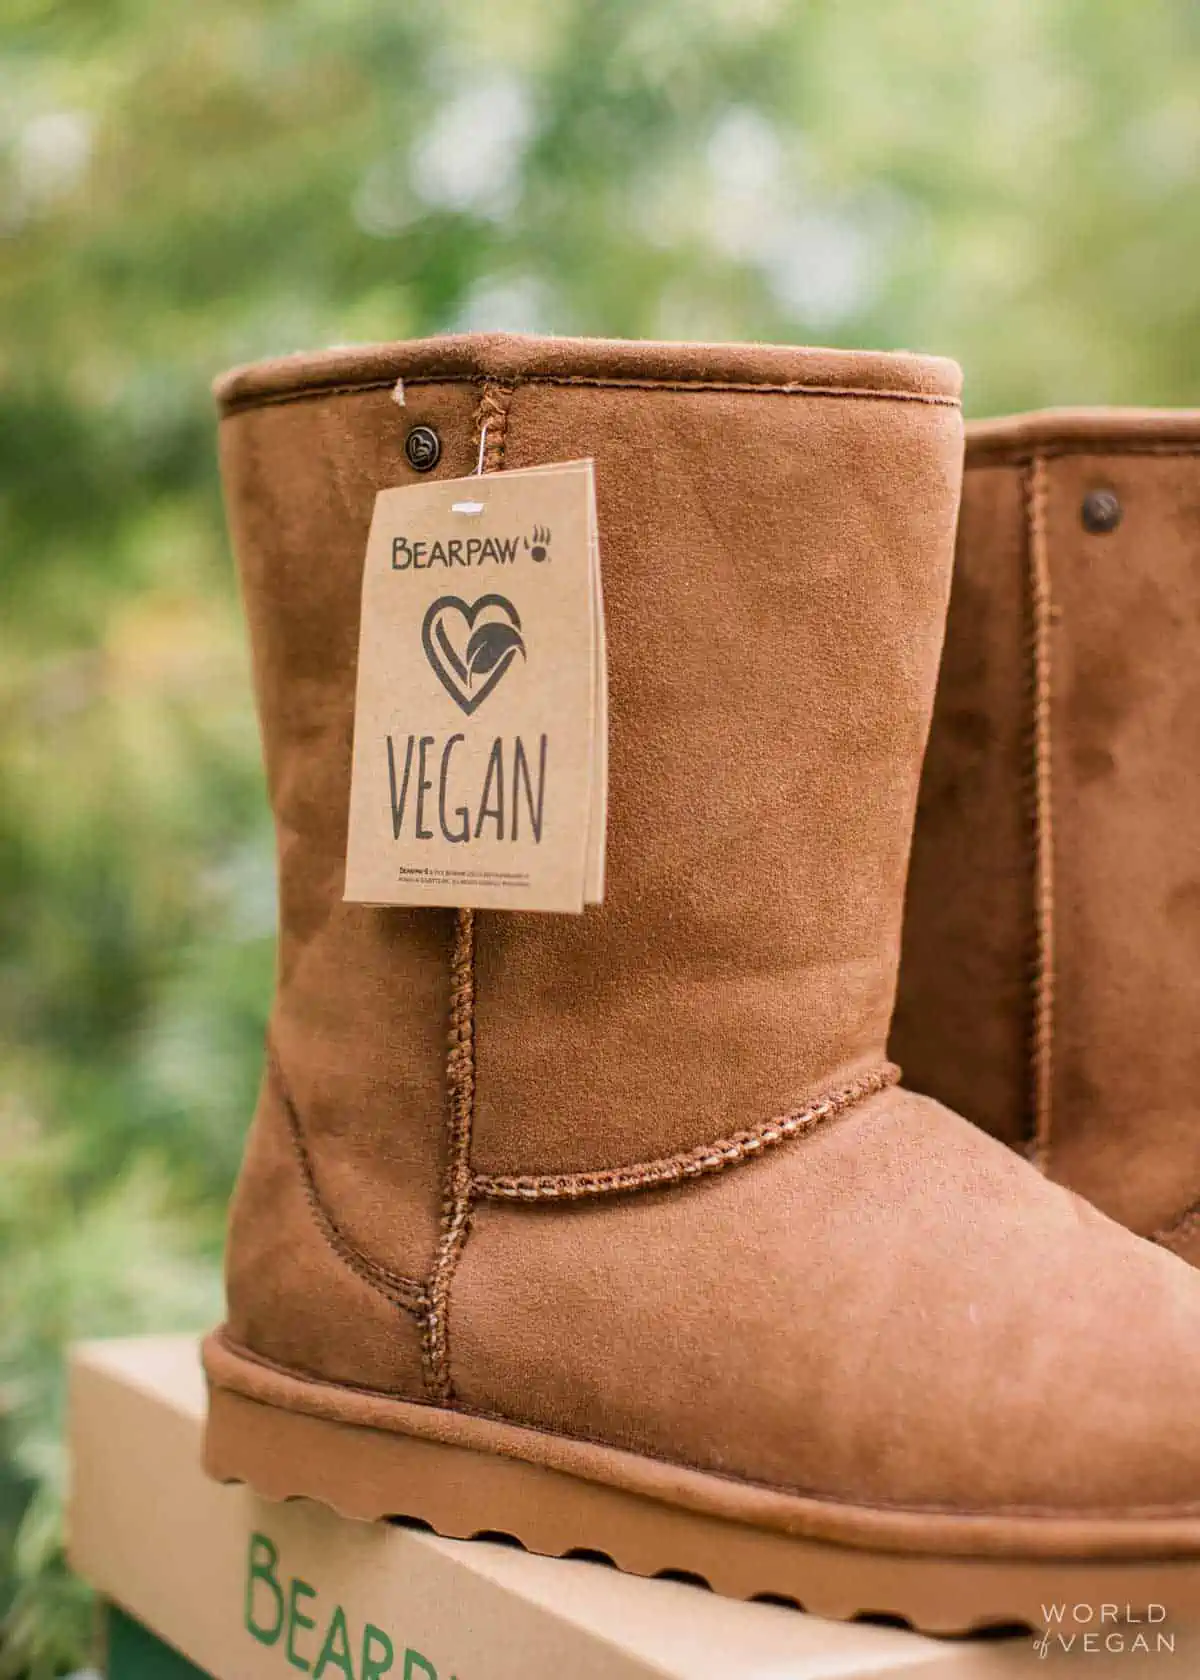 New synthetic brown Bearpaw brand UGGS boots with vegan tag.